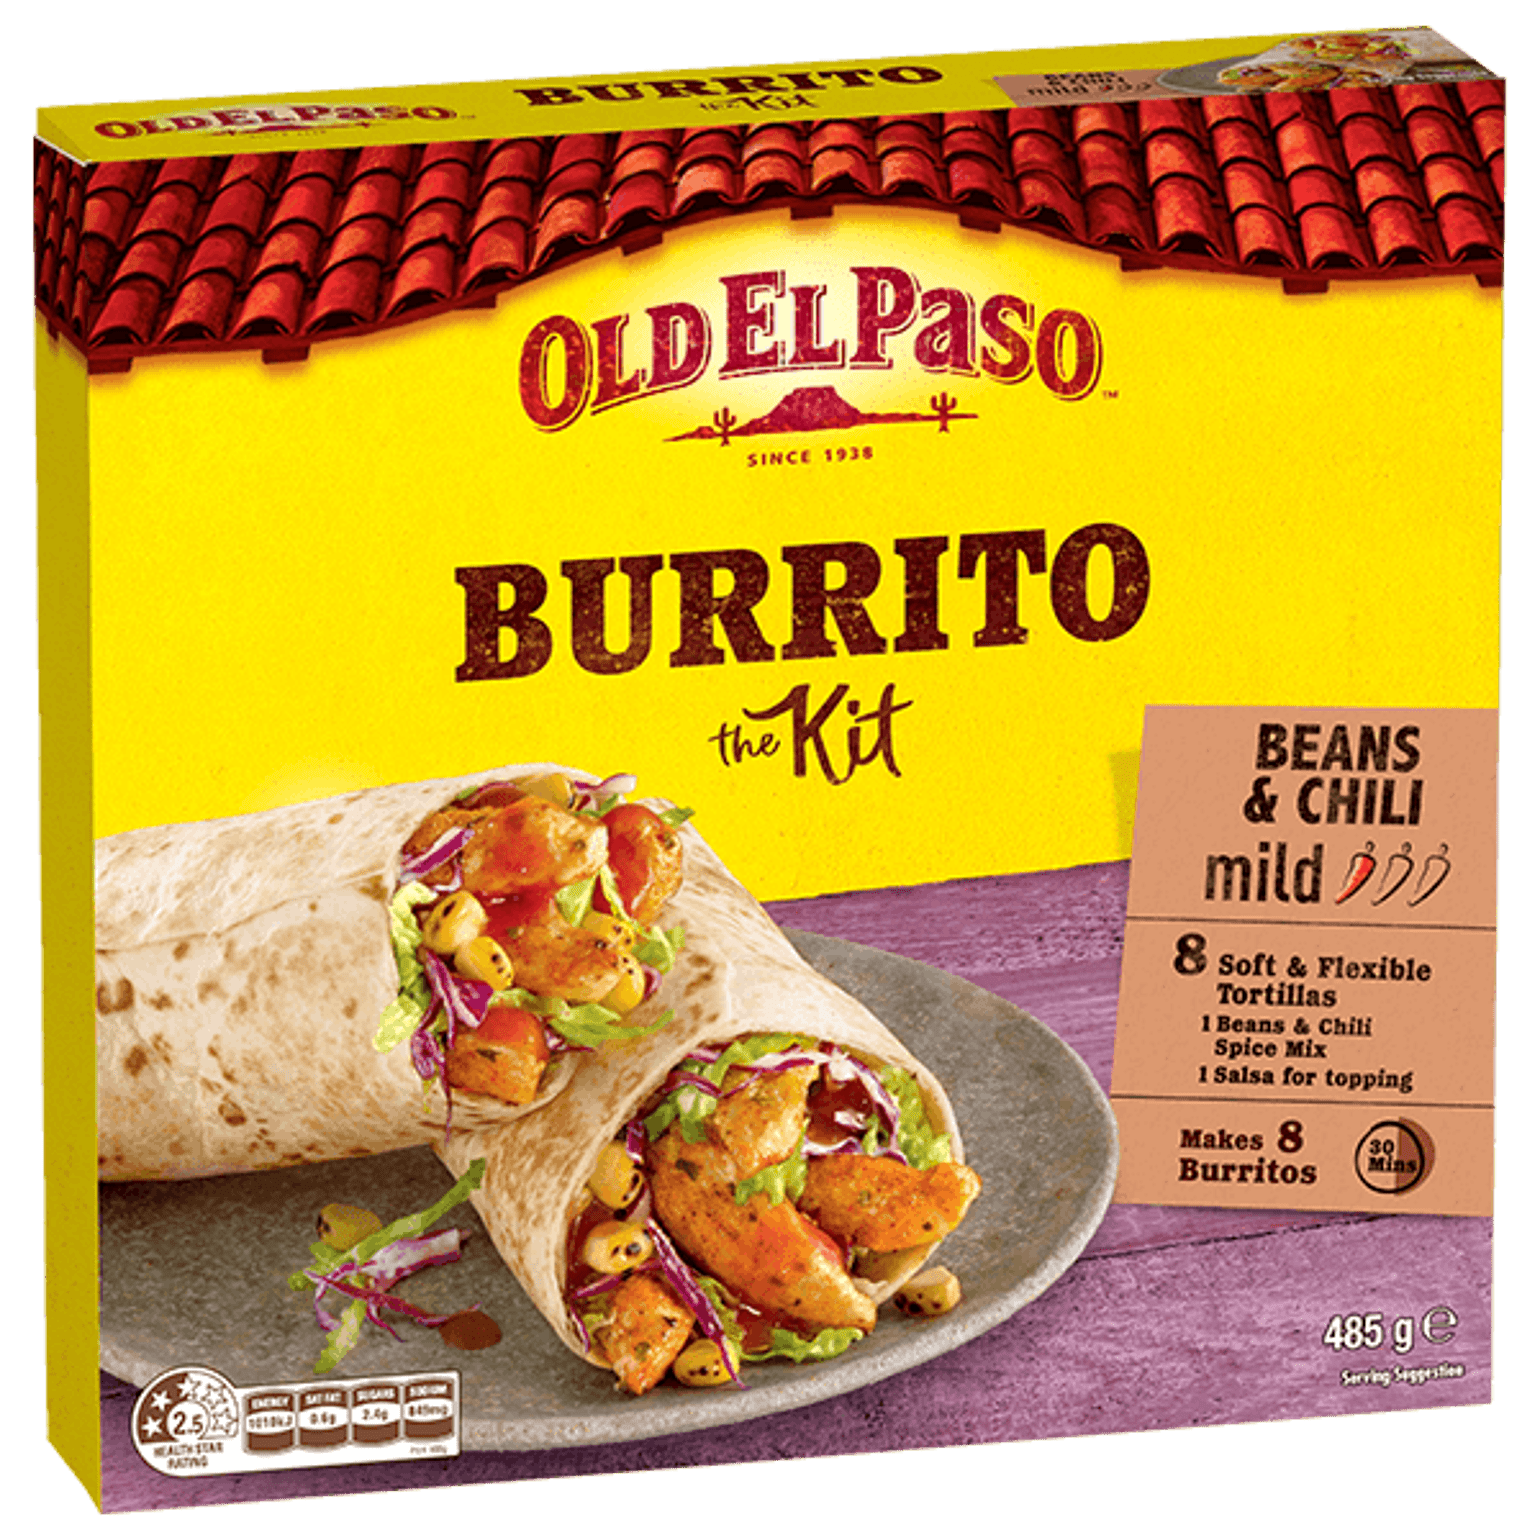 a pack of Old El Paso's beans & chili mild burrito kit containing tortillas, beans & chili spice mix & salsa for topping (485g)